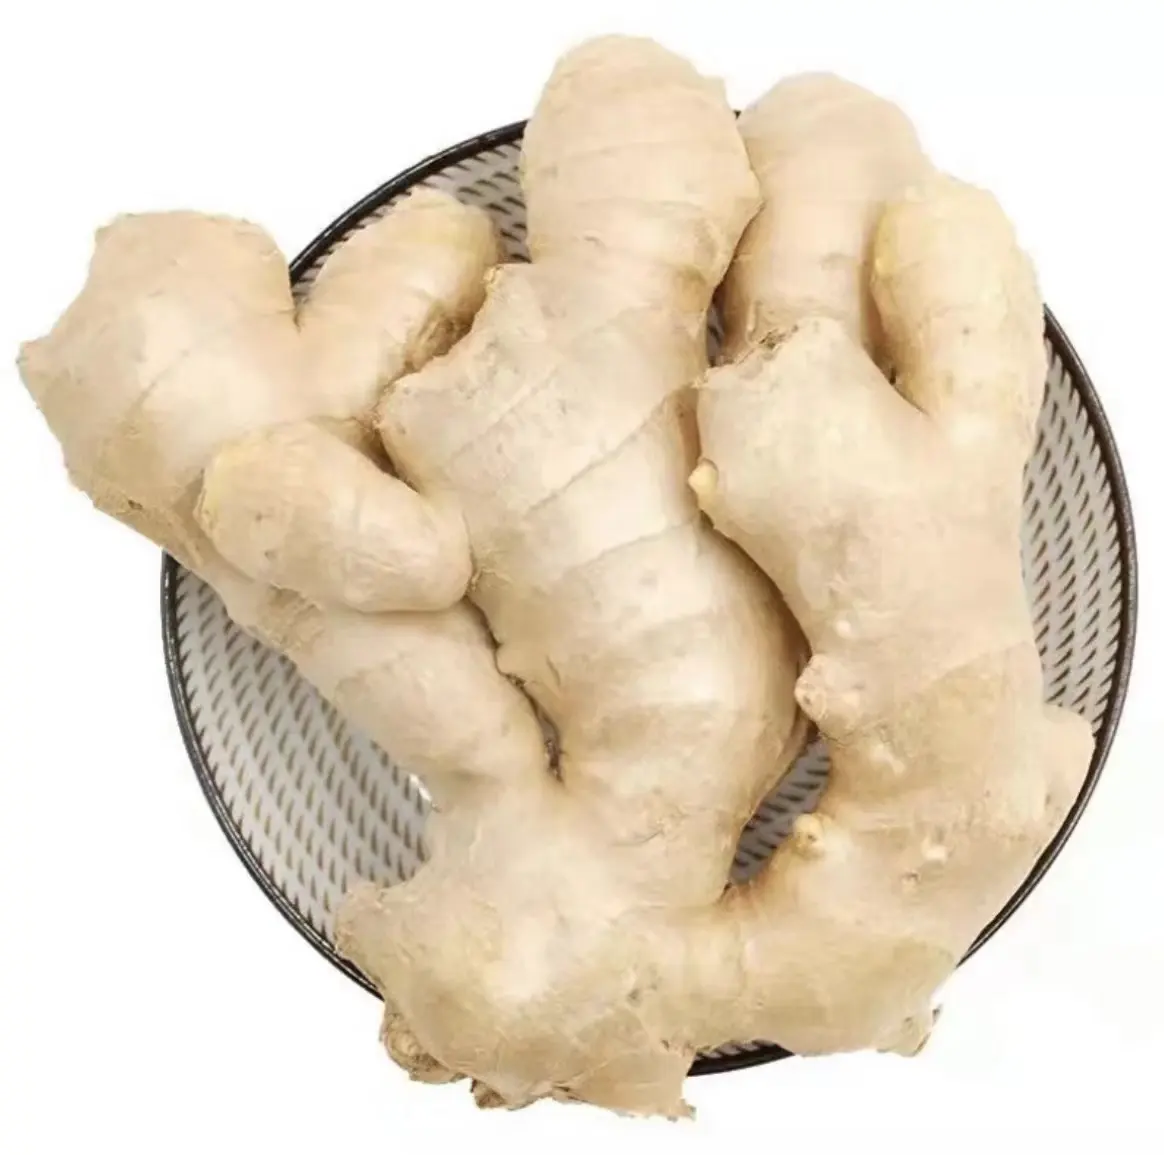 China Ginger Supplier New Arrival!!! - Fresh Air Dried Ginger, supply in 40'' reefer container ginger